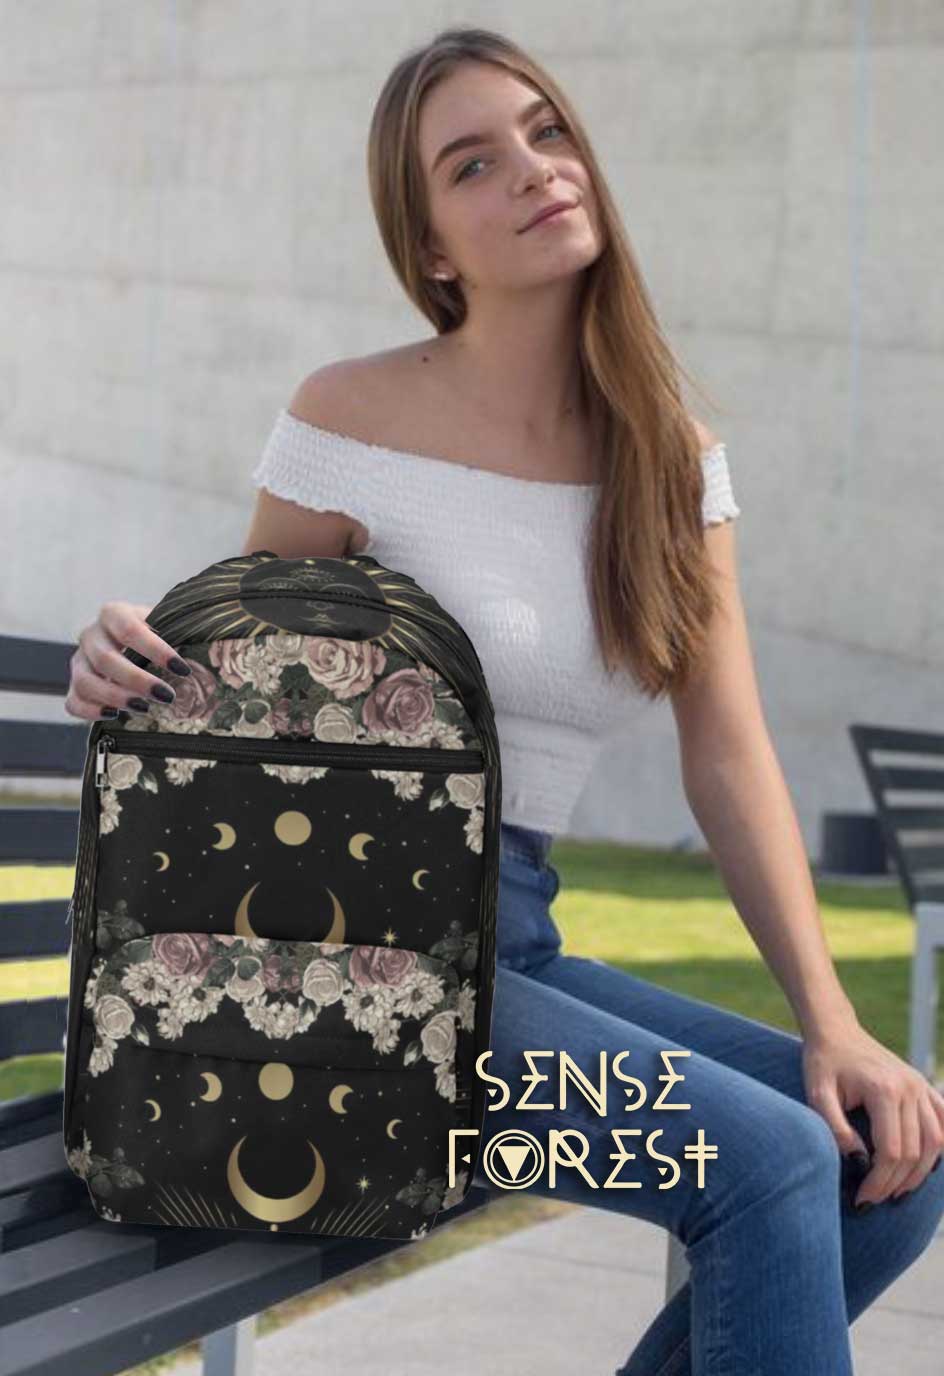 Pale Rose Moon Phase backpack